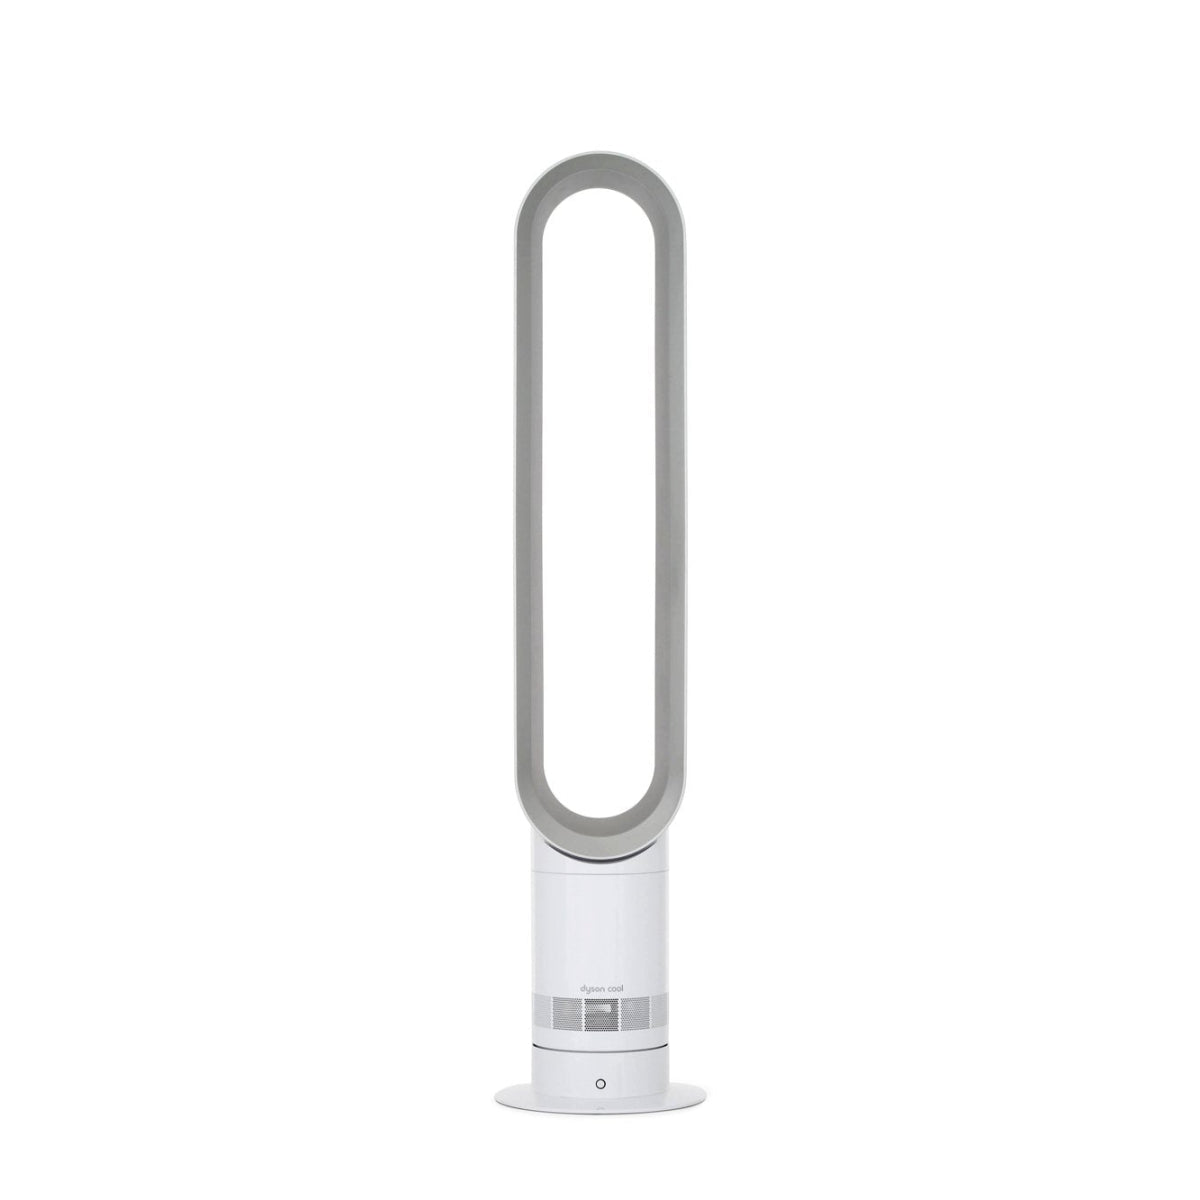 Dyson Cool AM07 Cool Tower Cooling Fan in White/Silver | Atlantic Electrics